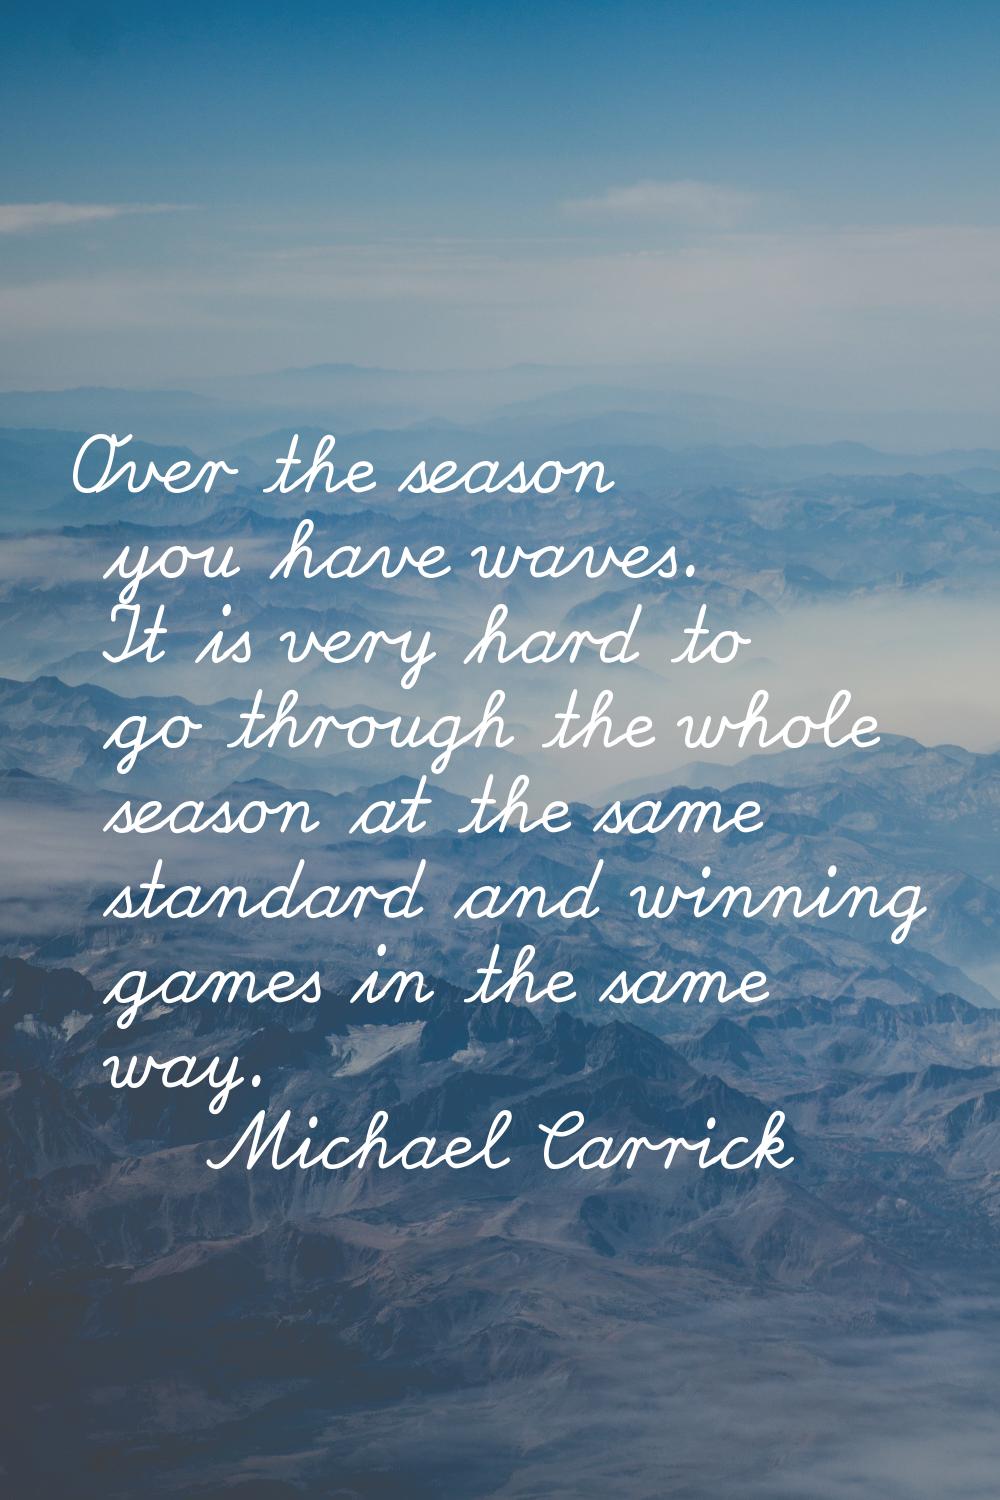 Over the season you have waves. It is very hard to go through the whole season at the same standard